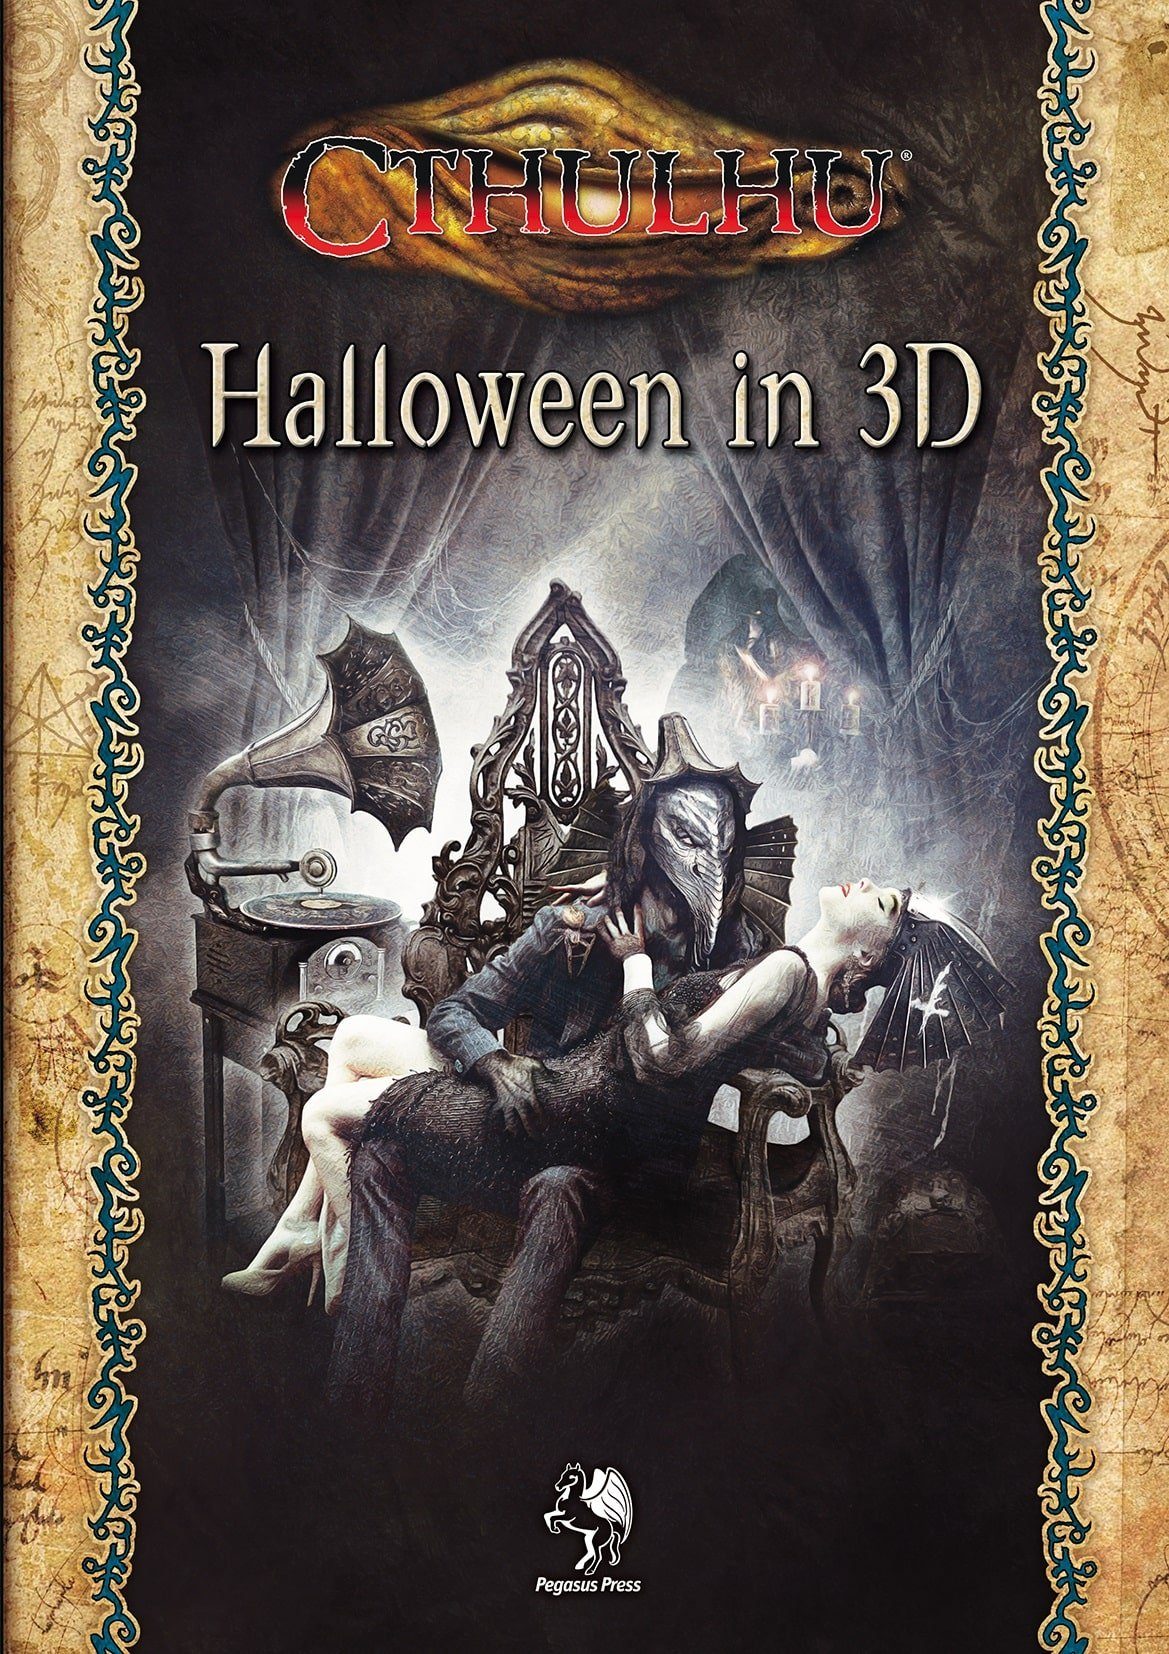 Halloween Spiel, (Softcover) 3D Spiele in Pegasus Cthulhu: